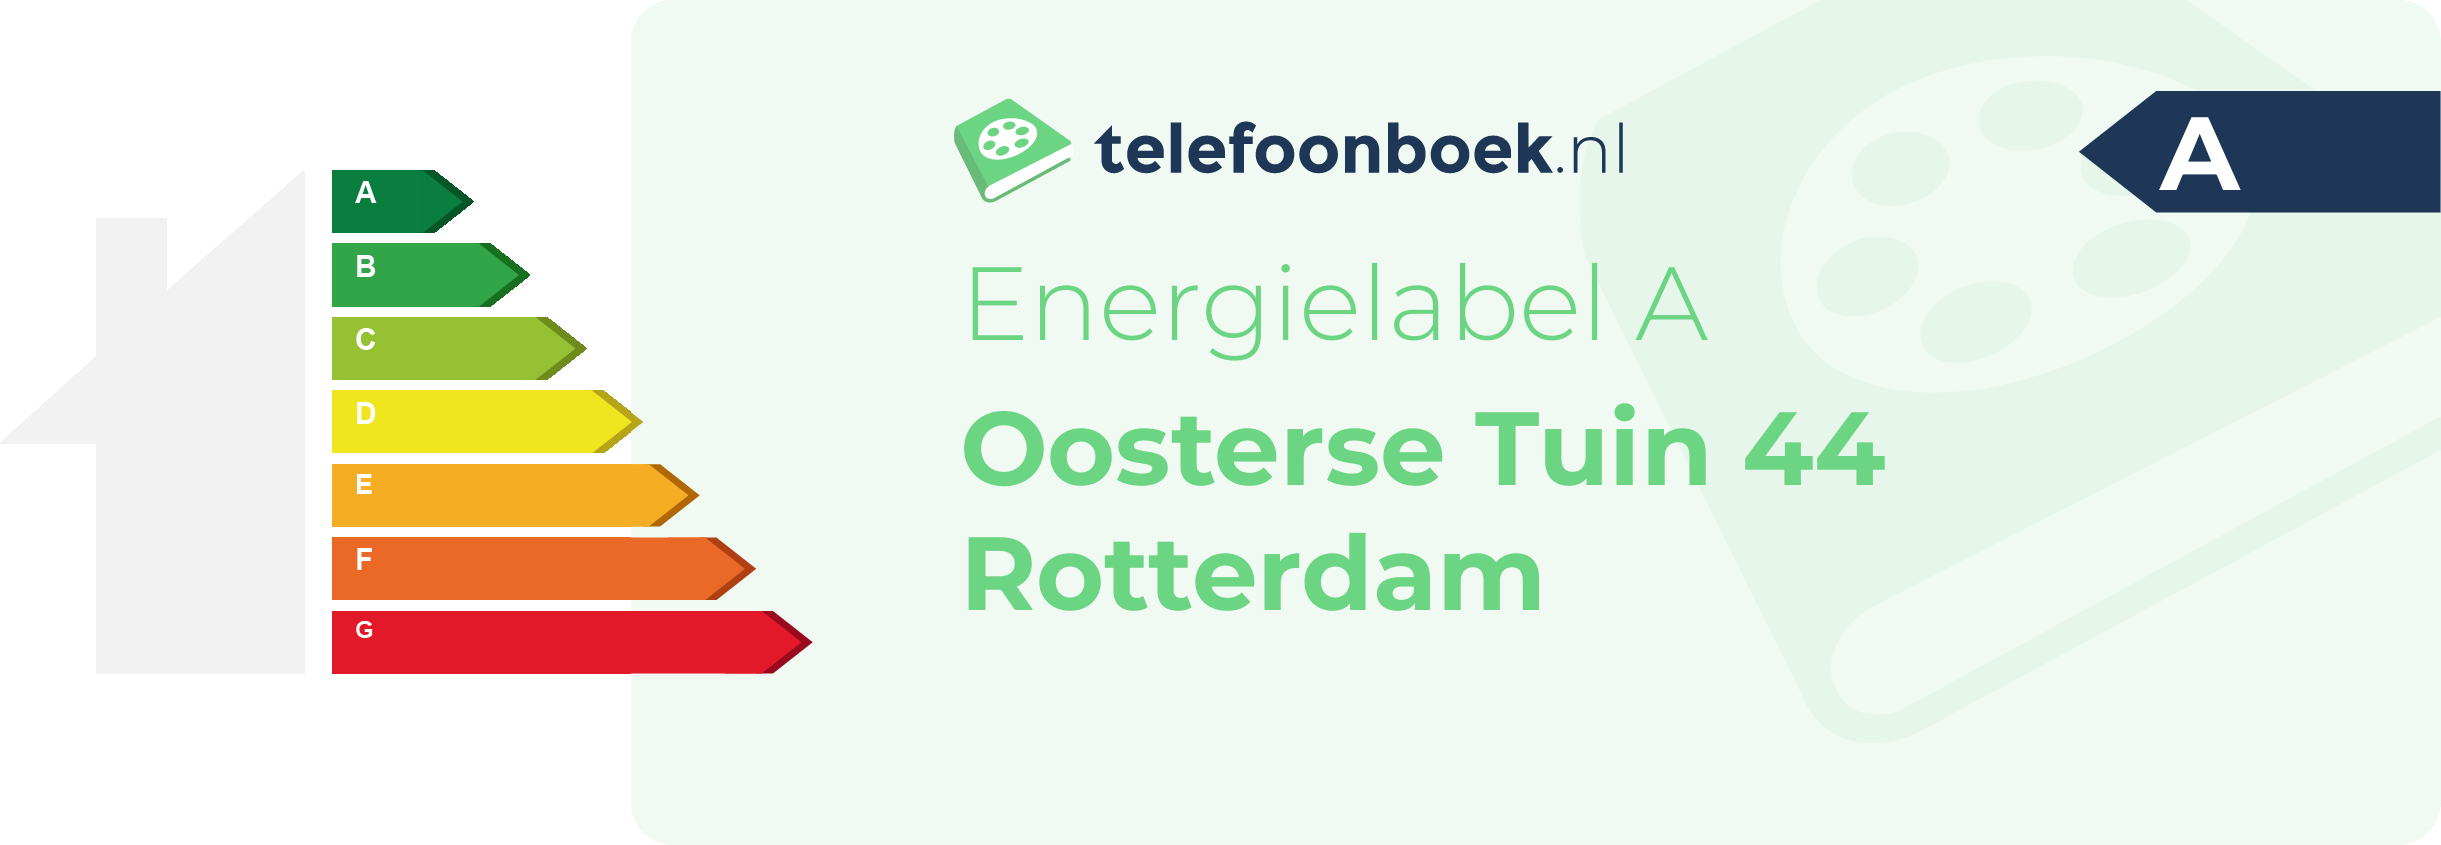 Energielabel Oosterse Tuin 44 Rotterdam